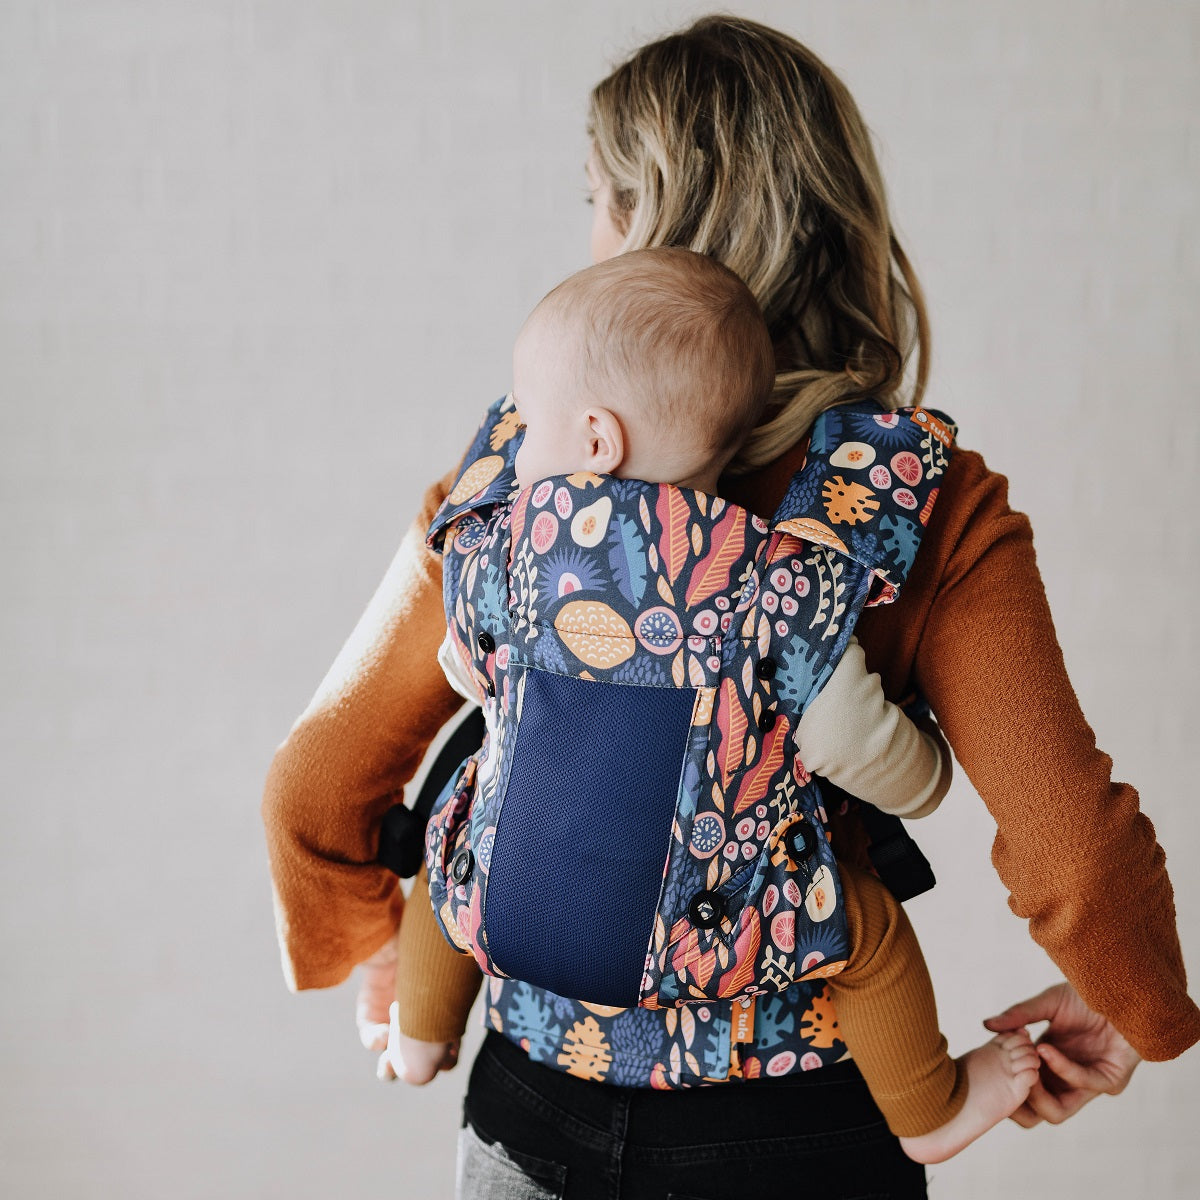 tula mesh baby carrier